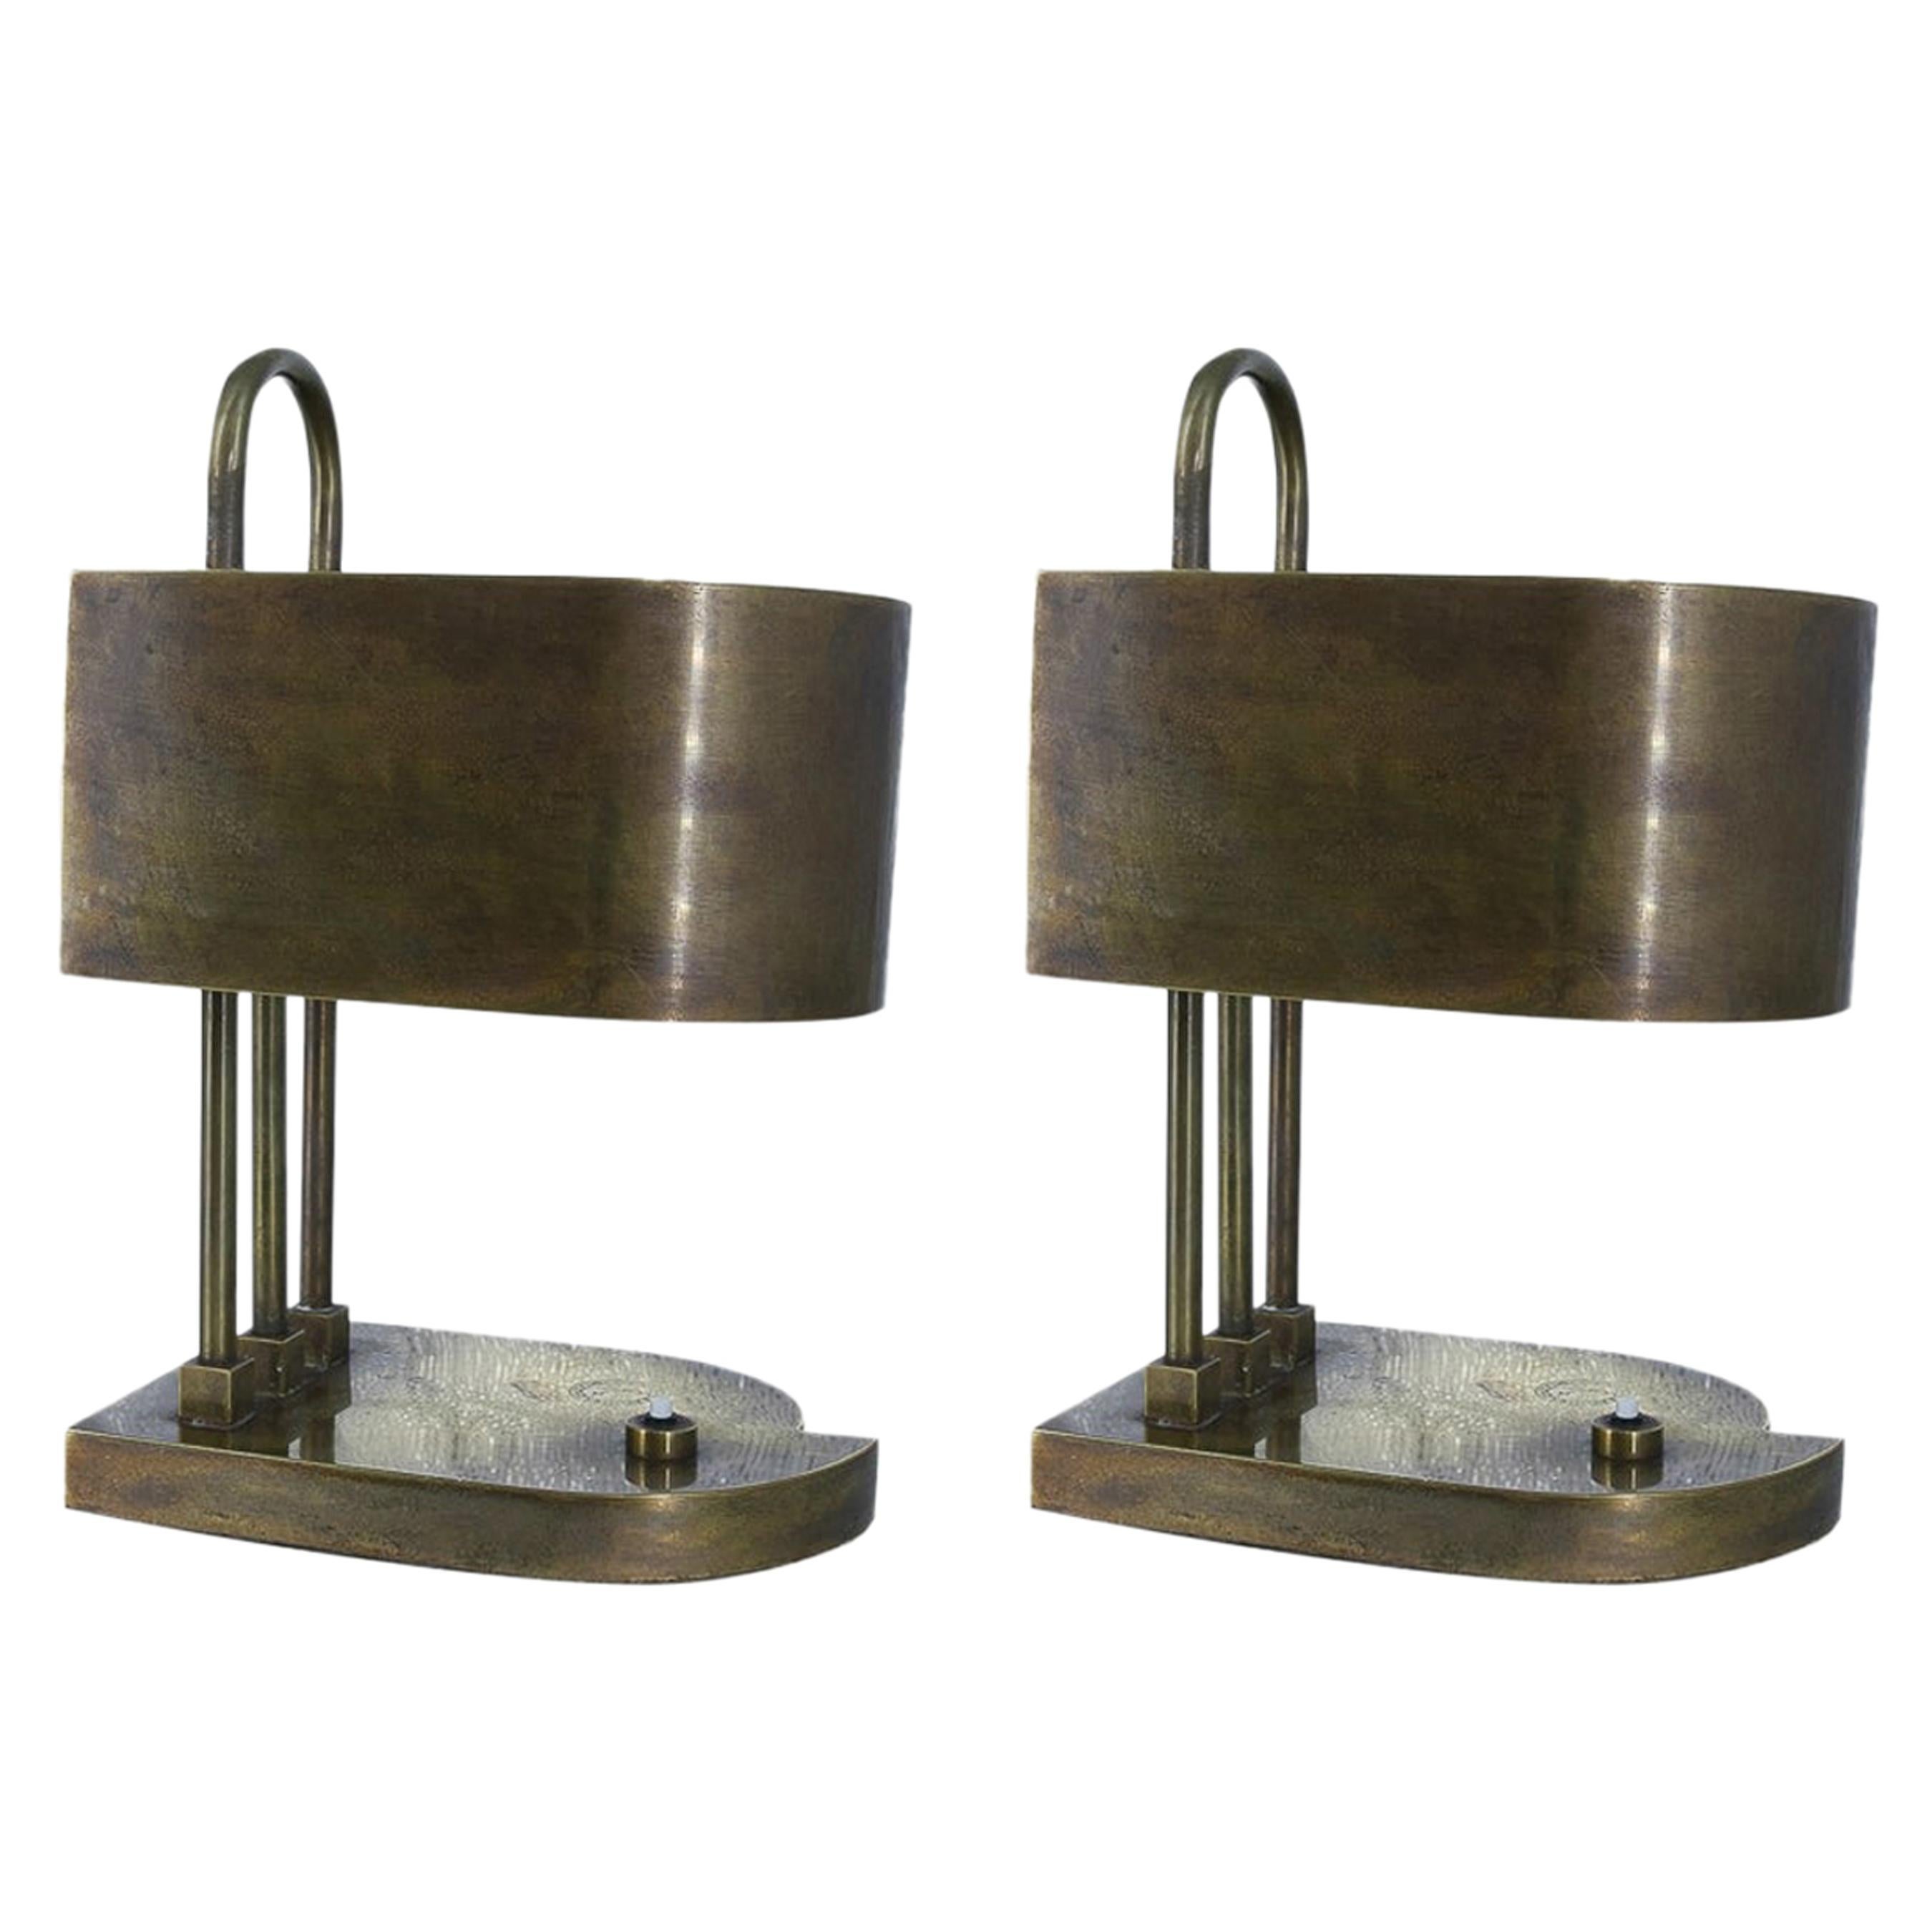 Pair of Brass Bauhaus Bedside Lamp, Made in Germany, 1920s-1930s